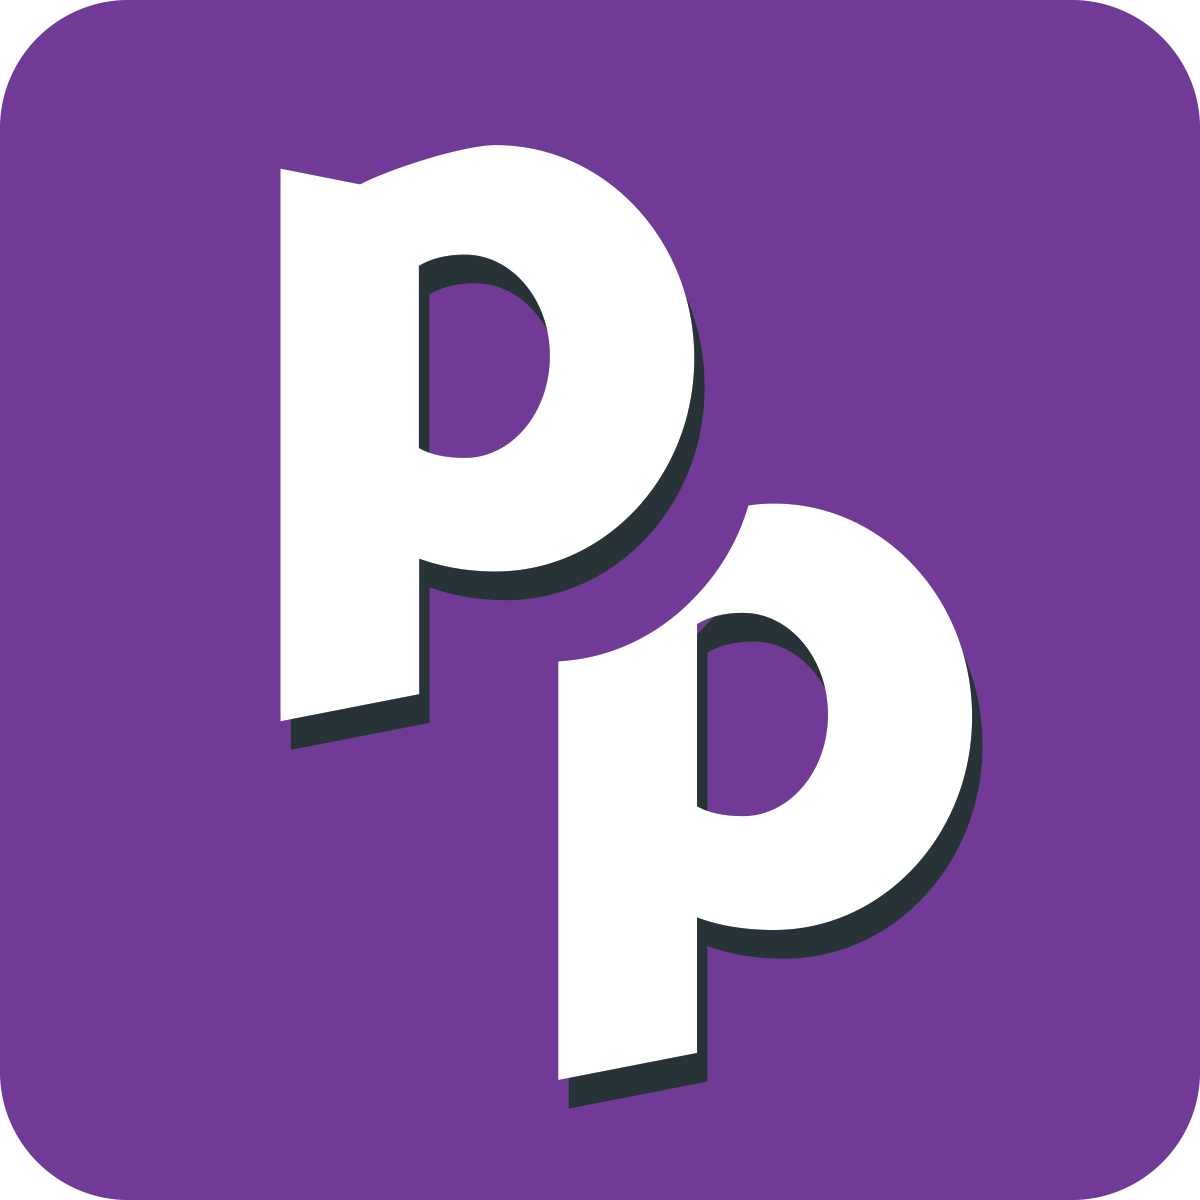 Hire Shopify Experts to integrate PurplePro‑Loyalty Rewards Quiz app into a Shopify store